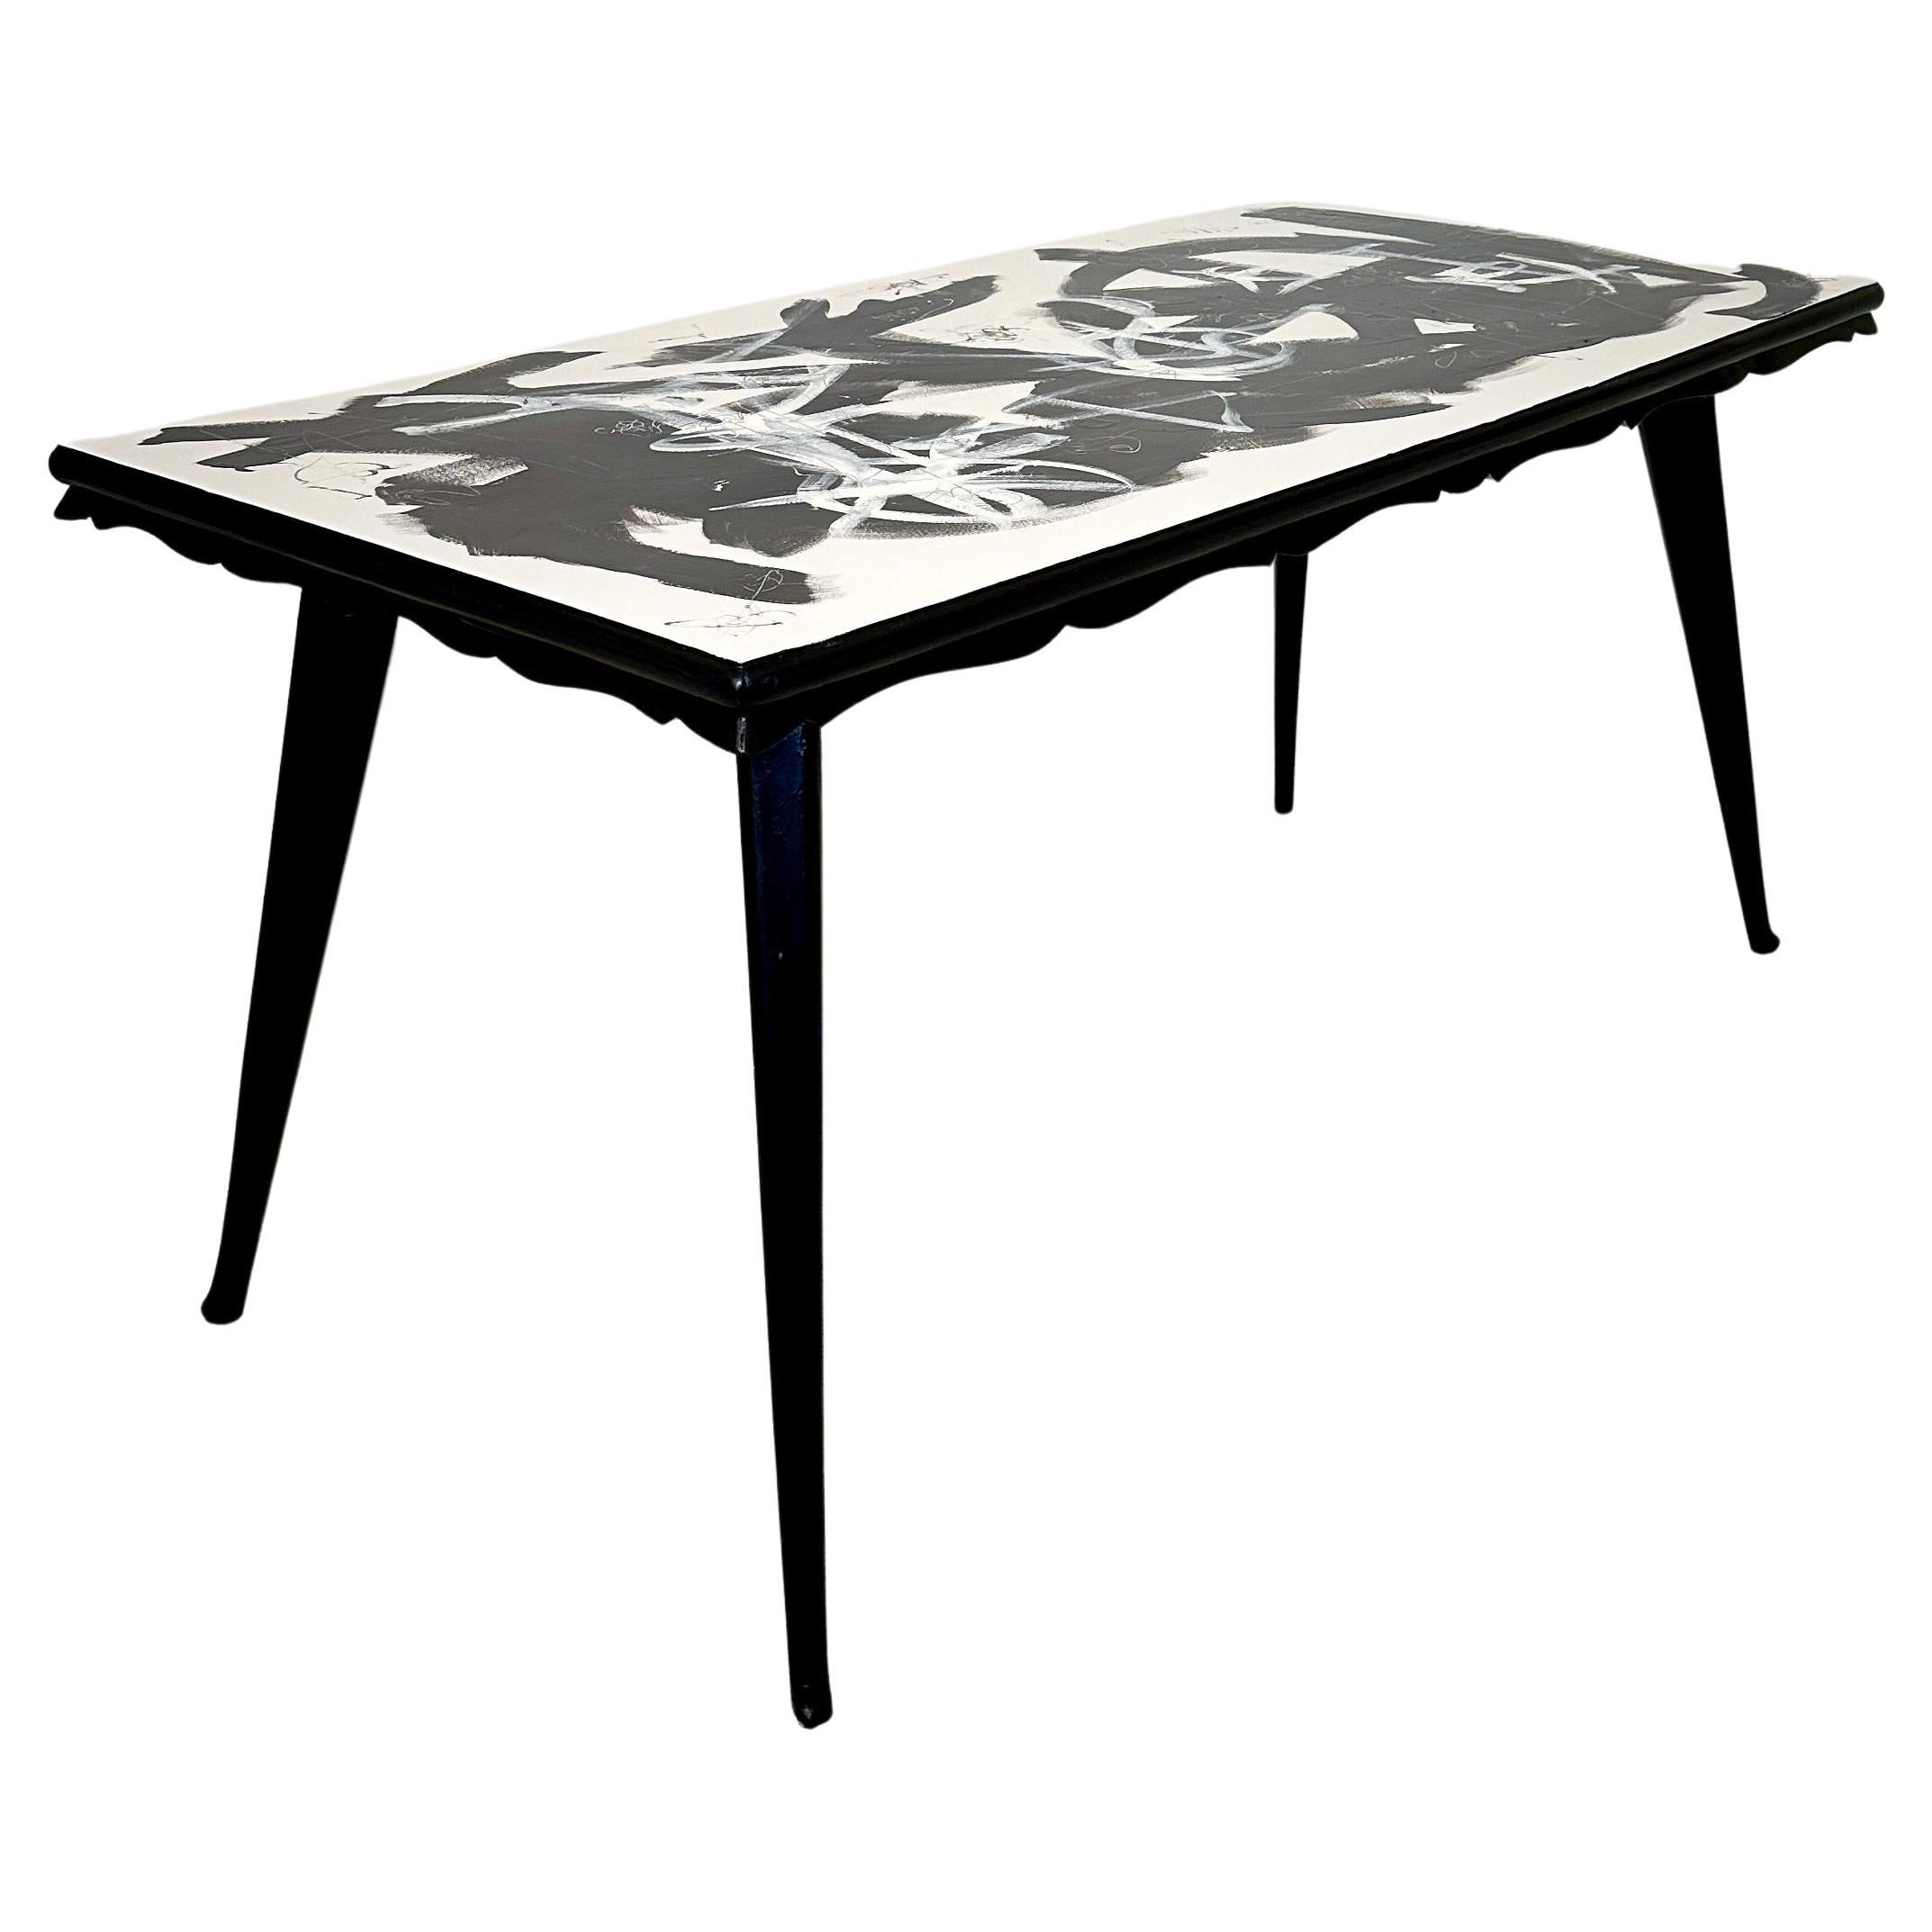 Contemporary Abstract Painted Dining Table in Black and White, 1950s Base For Sale